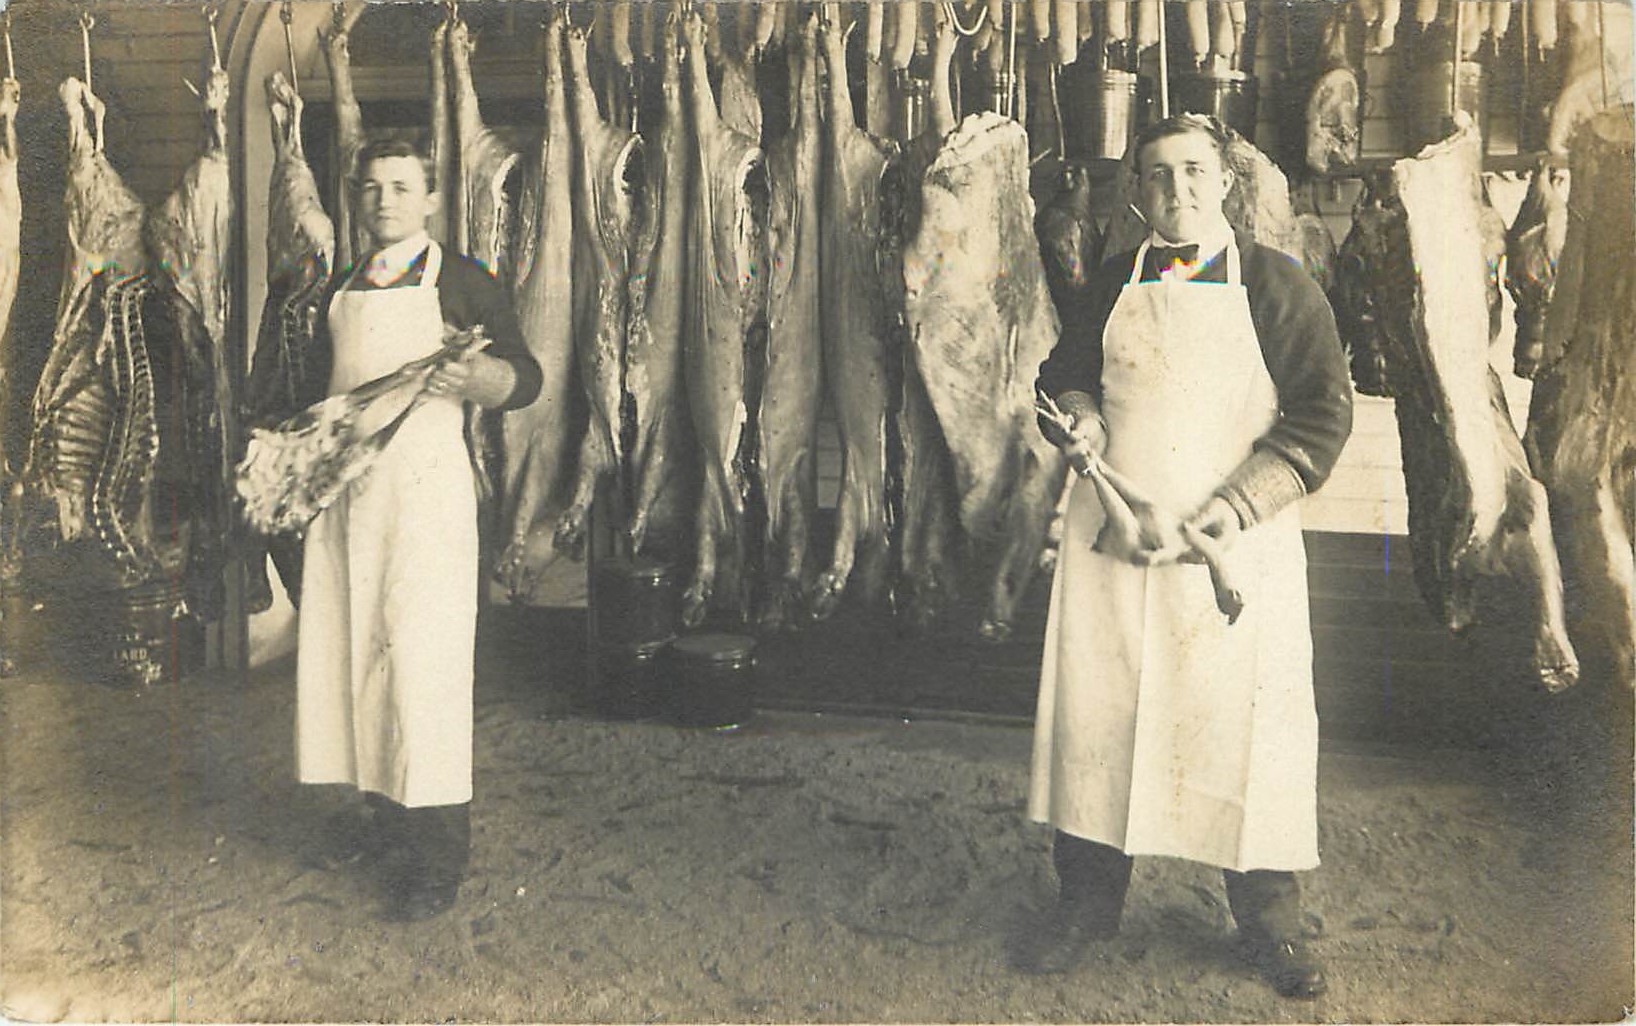 Butchers at Work